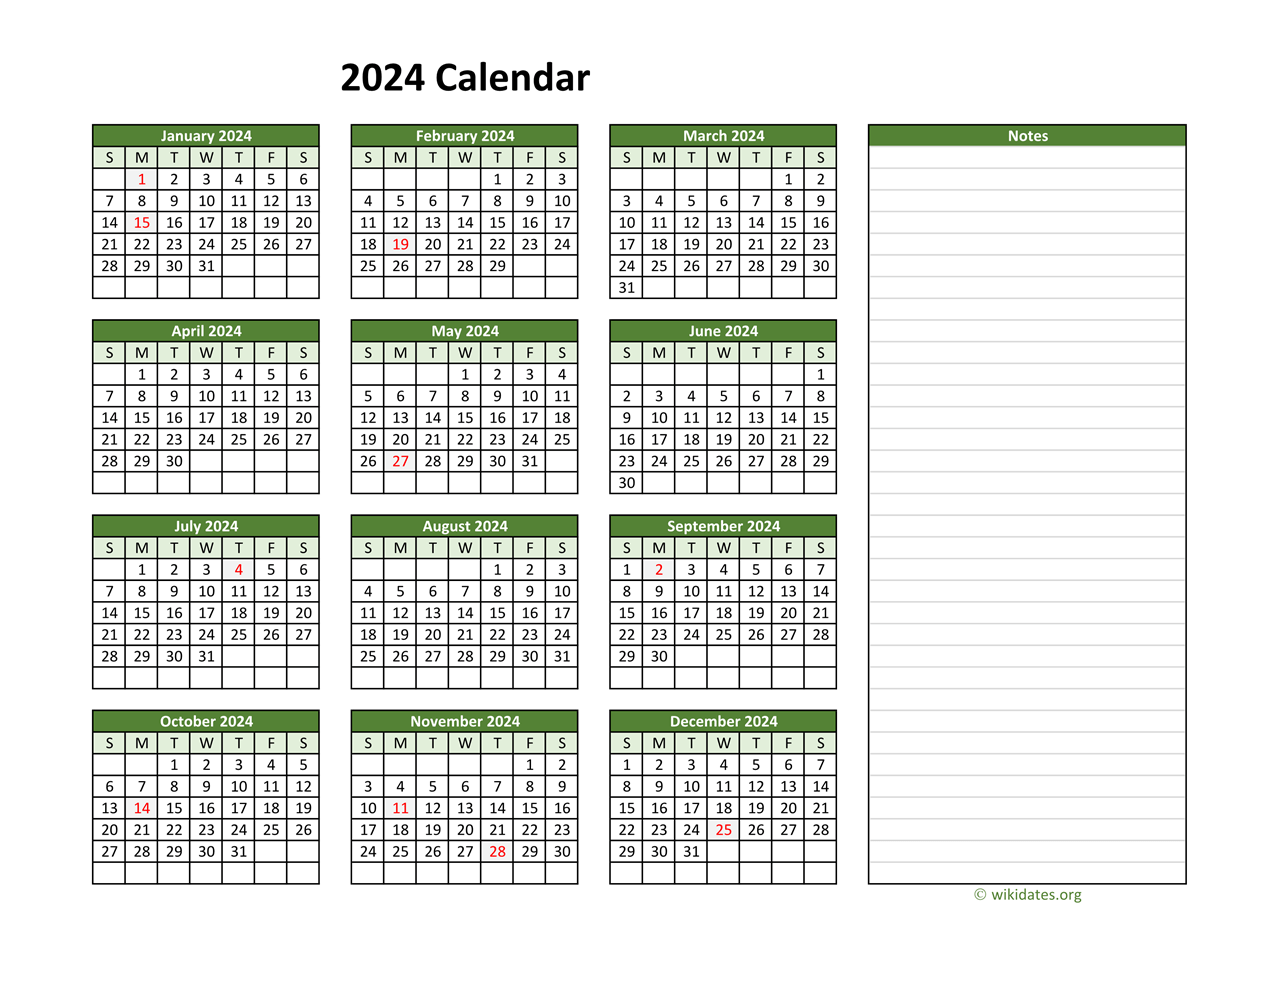 Yearly Printable 2024 Calendar With Notes | Wikidates for Printable Calendar 2024 With Notes